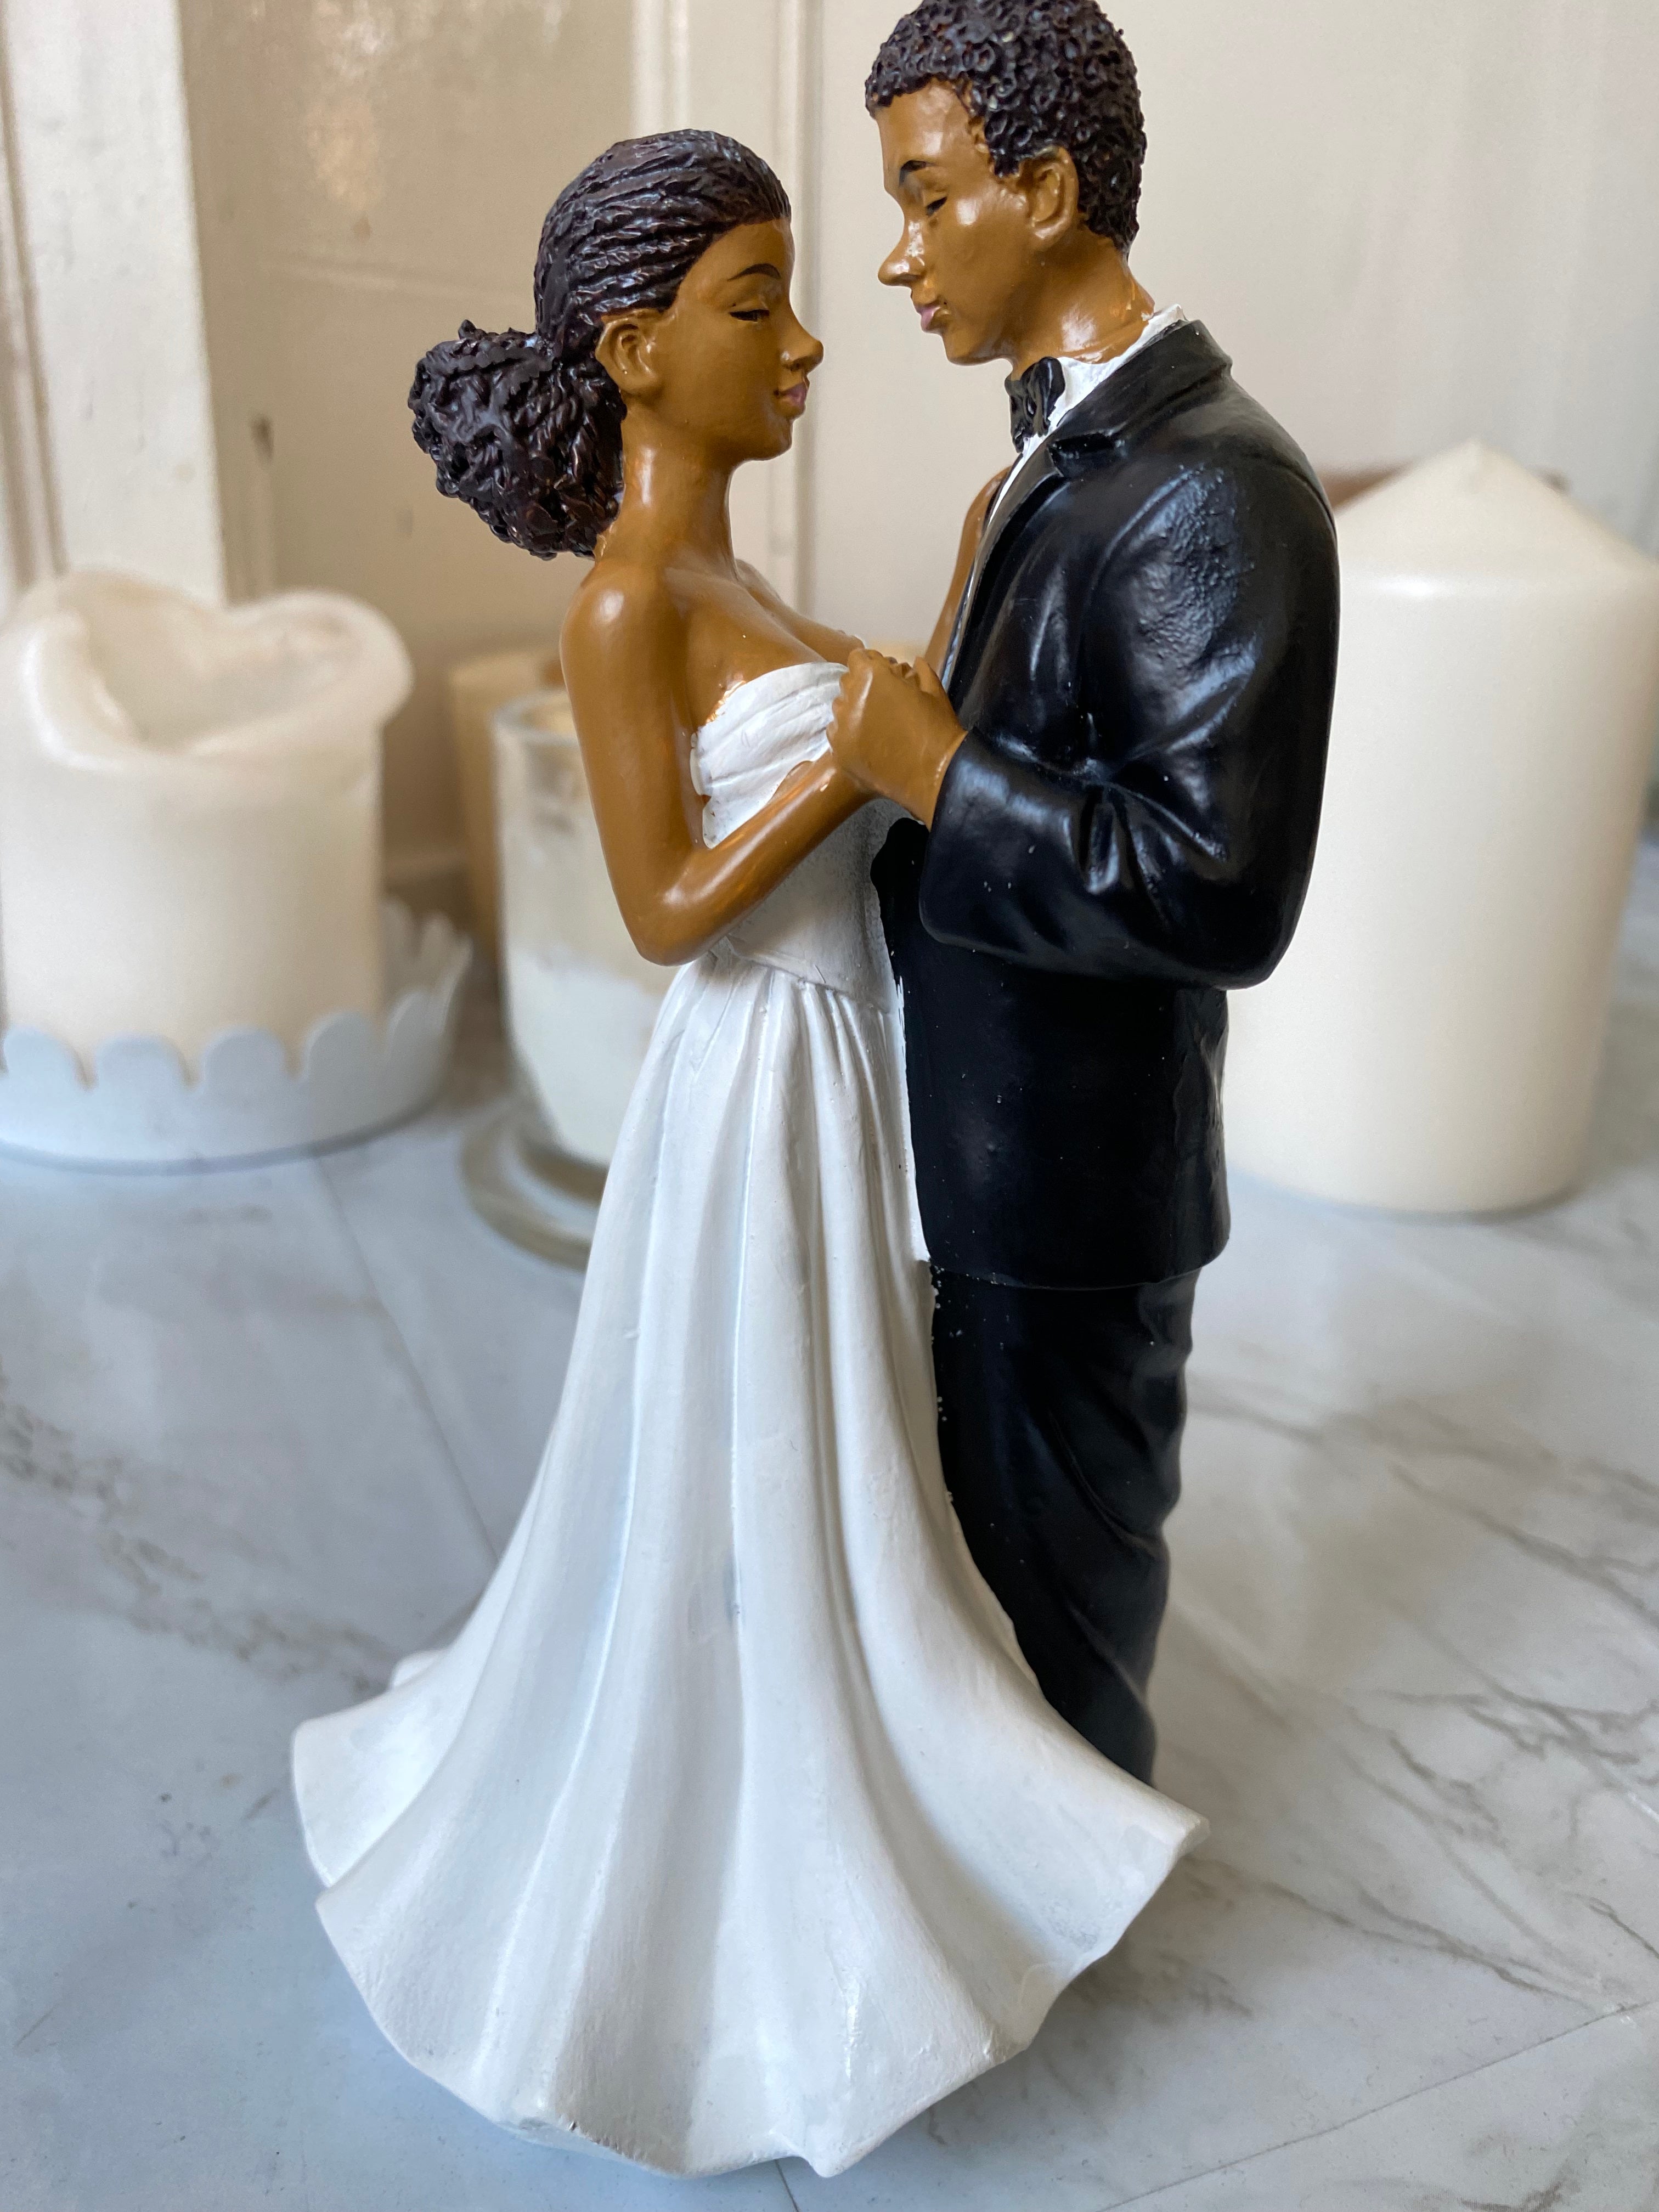 20 Creative Wedding Cake Toppers - Chic Vintage Brides : Chic Vintage Brides